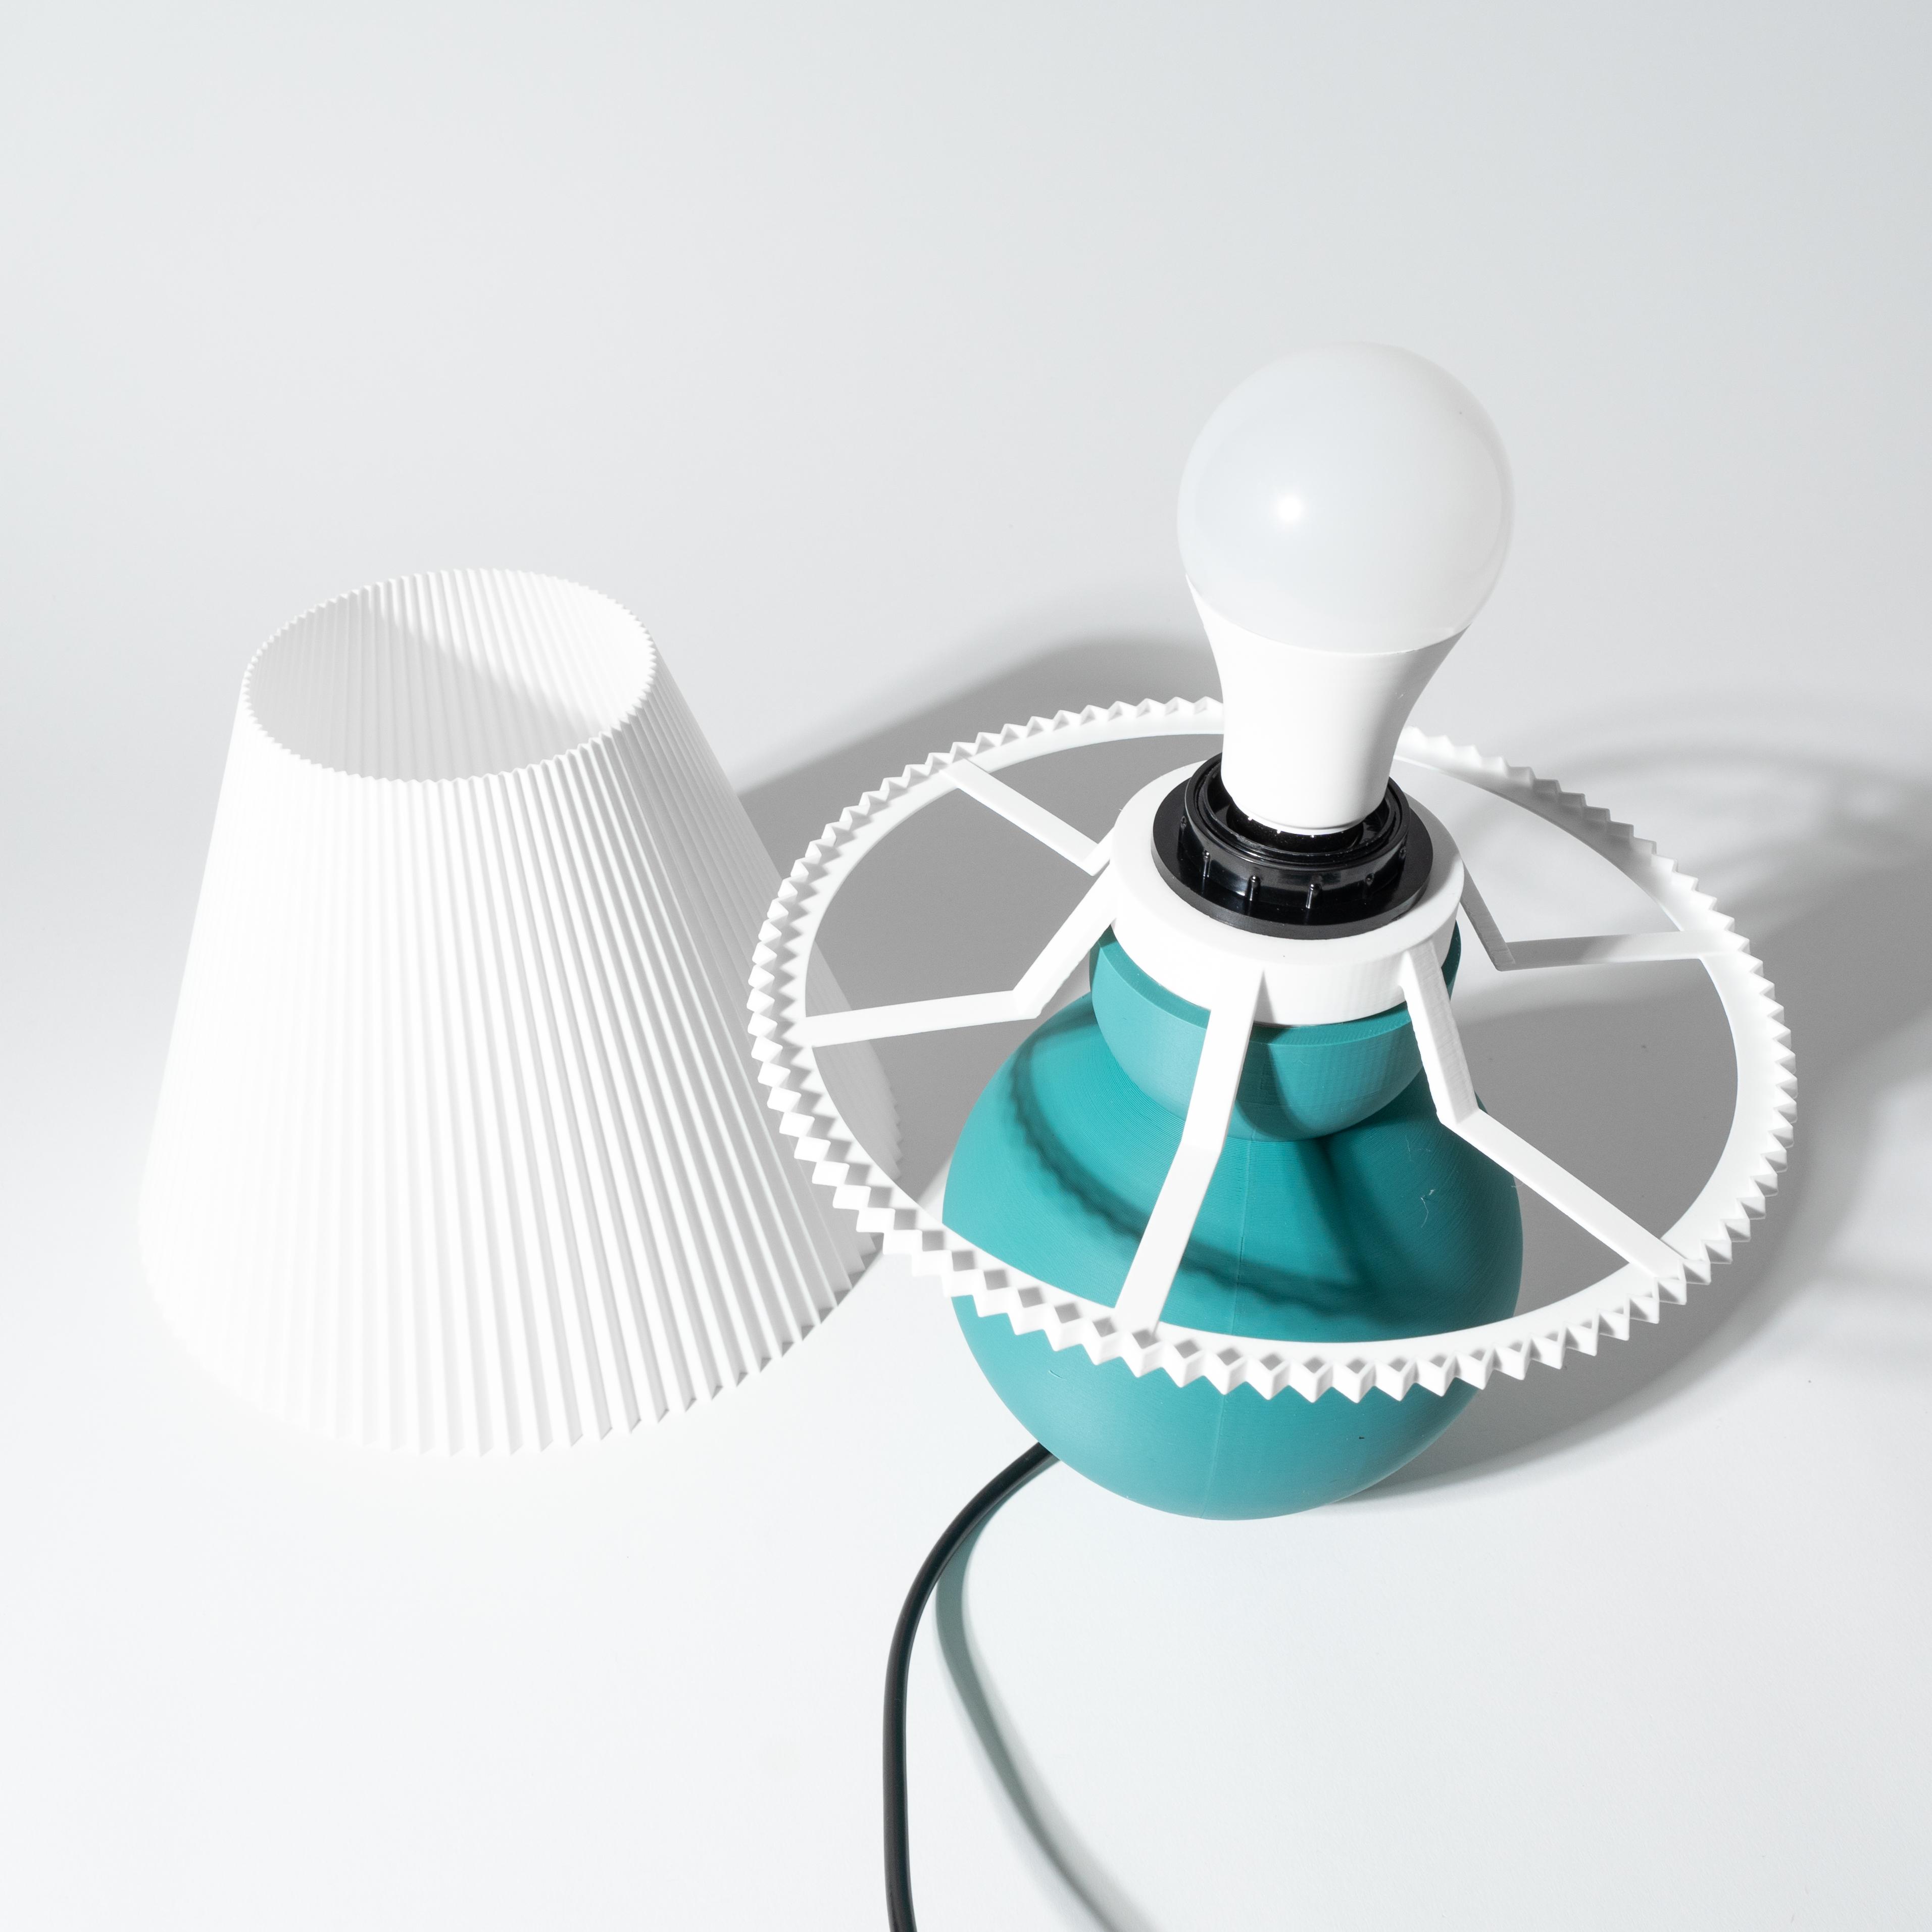 The Vima Lamp | Modern and Unique Home Decor for Desk and Table 3d model